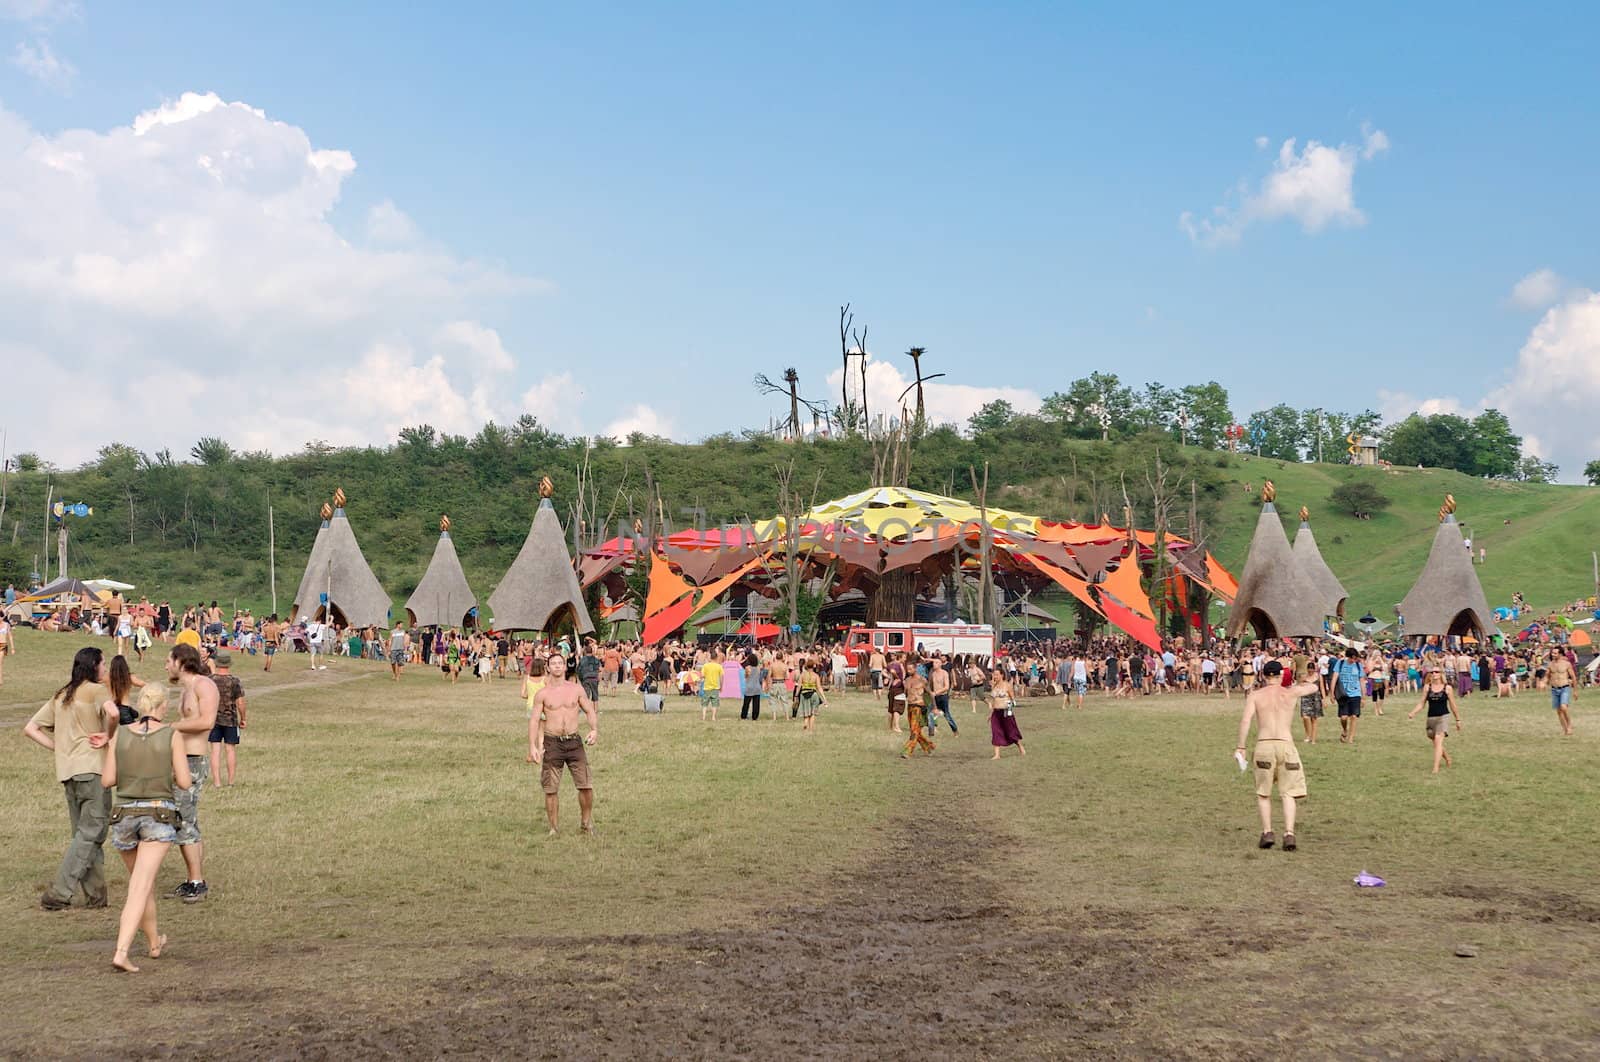 OZORA, HUNGARY - AUGUST 01: Main stage on Ozora Festival, one of by anderm